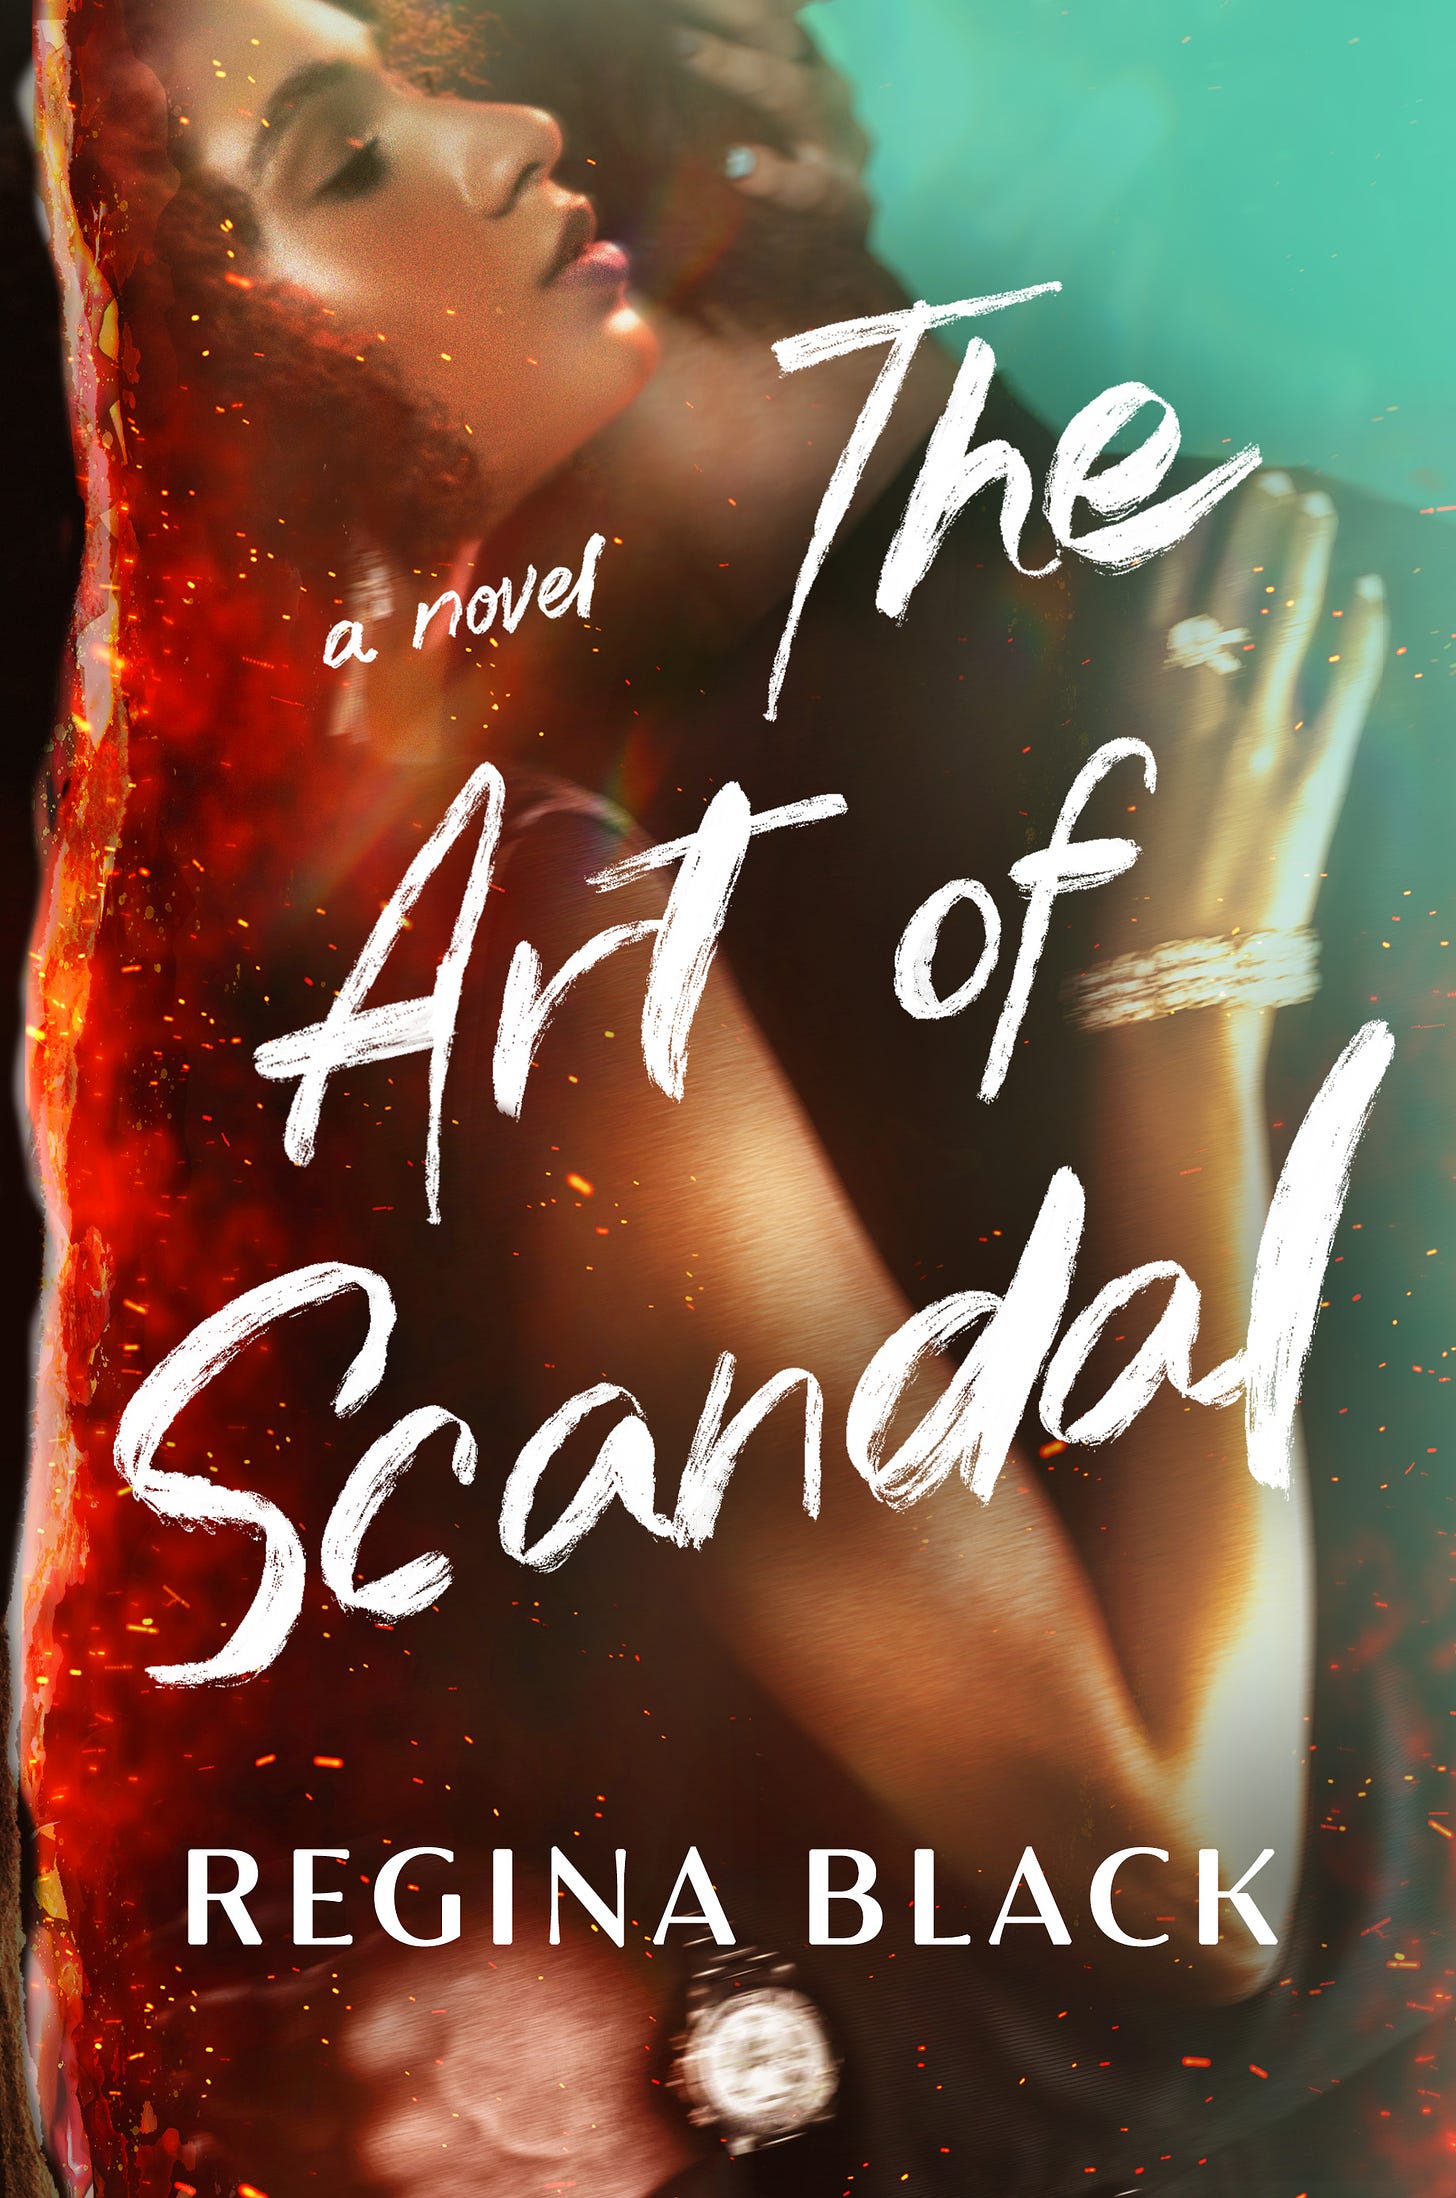 Book Cover for Regina Black's The Art of Scandal. A Black woman embracing a man while the left edge of the book burns and sparks.